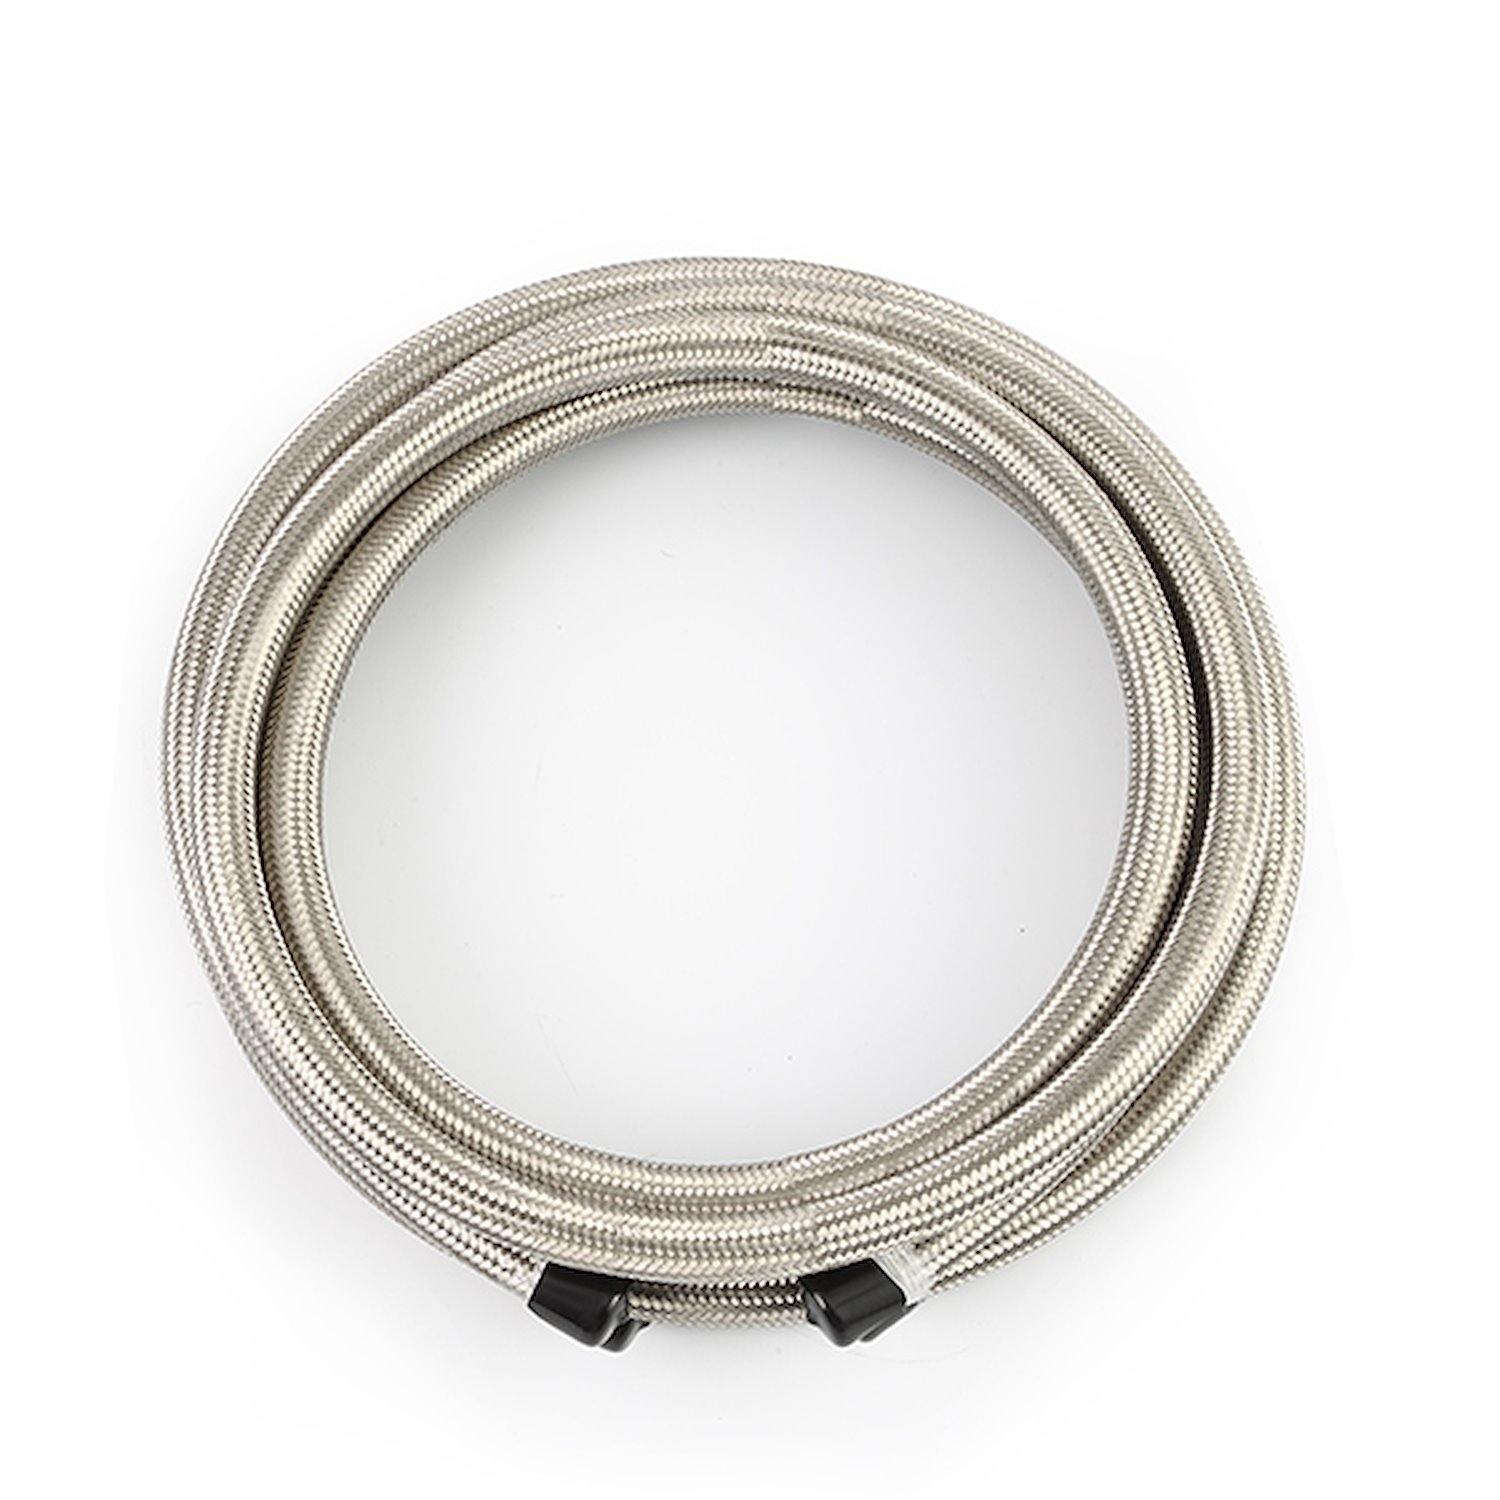 10AN 15FT. HOSE STAINLESS